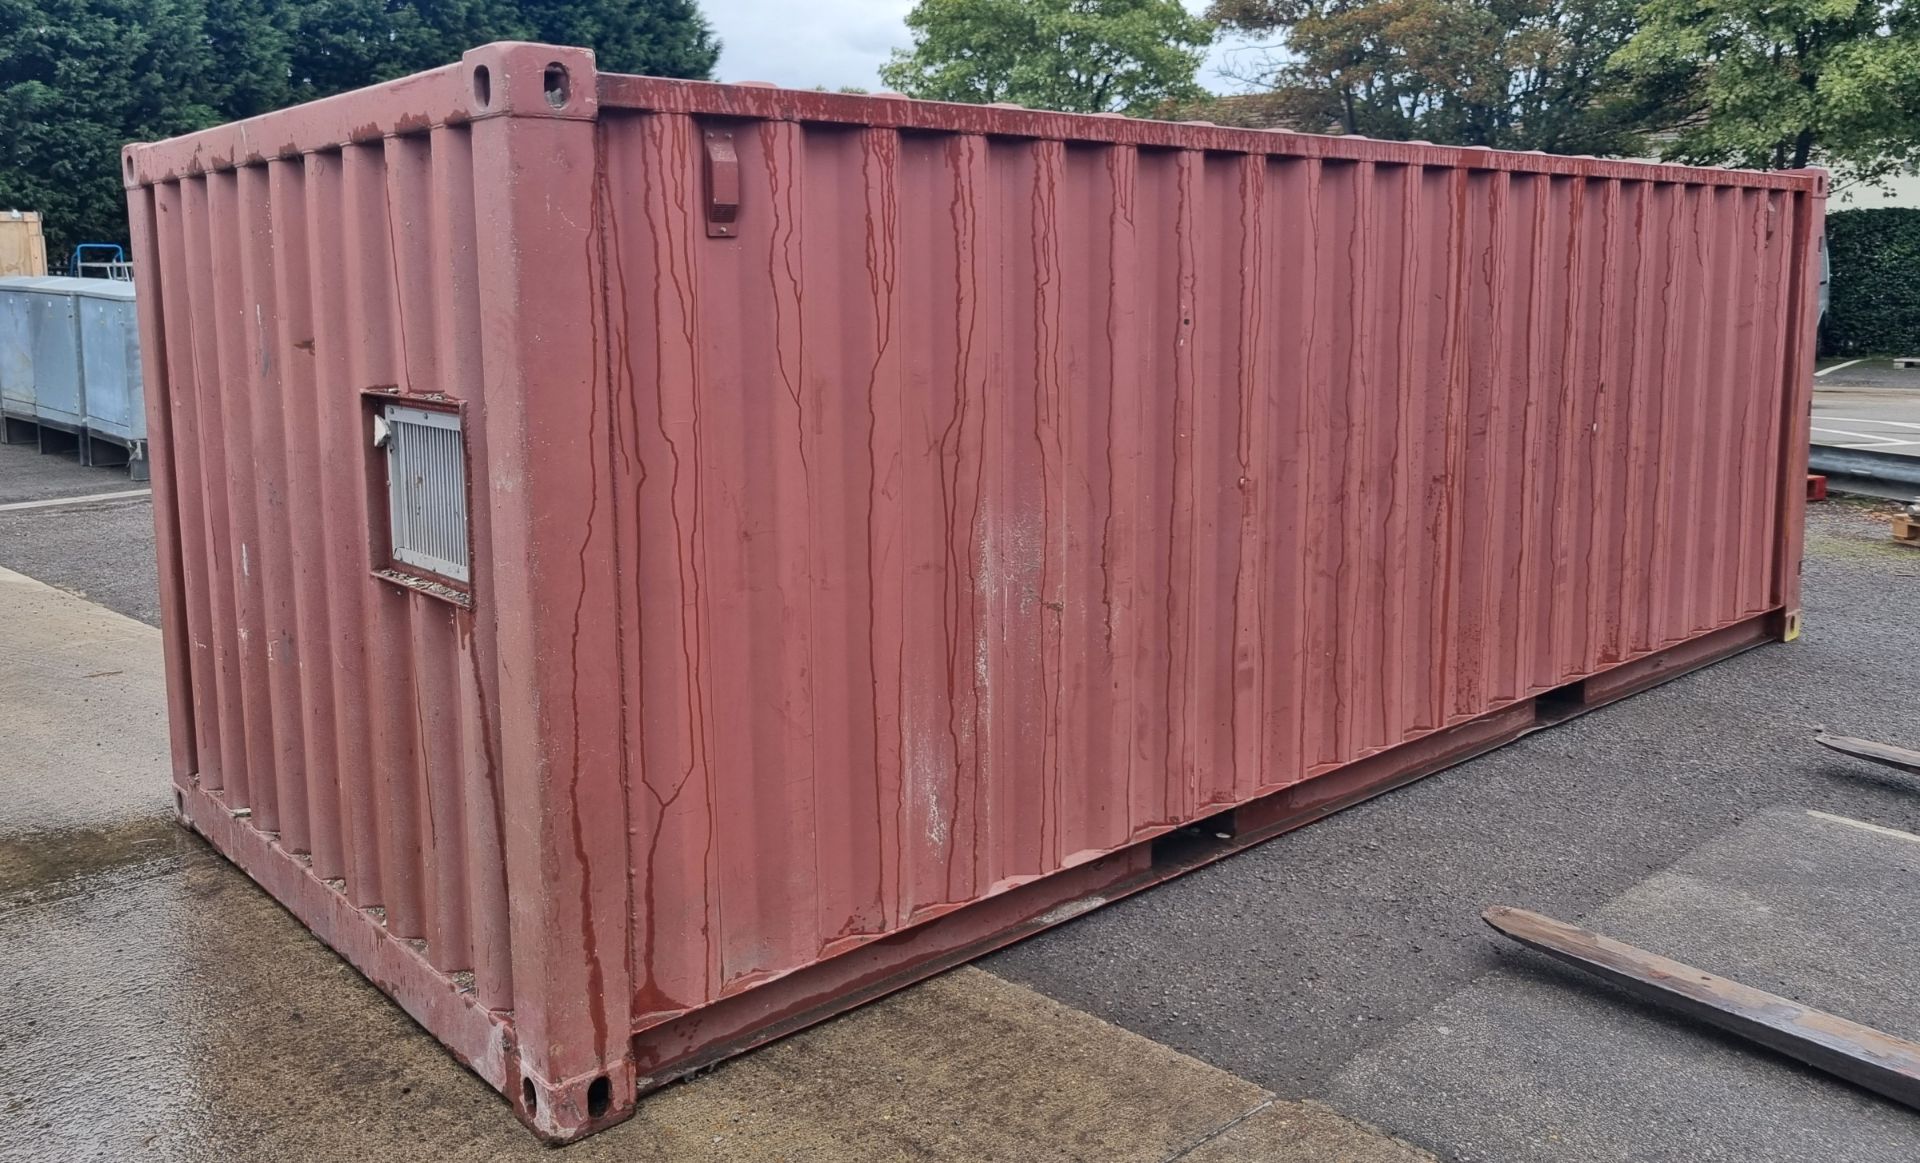 Stonehaven Engineering Ltd transportable storage container ISO 499/99/01 - dimensions: 20ft x 8ft x